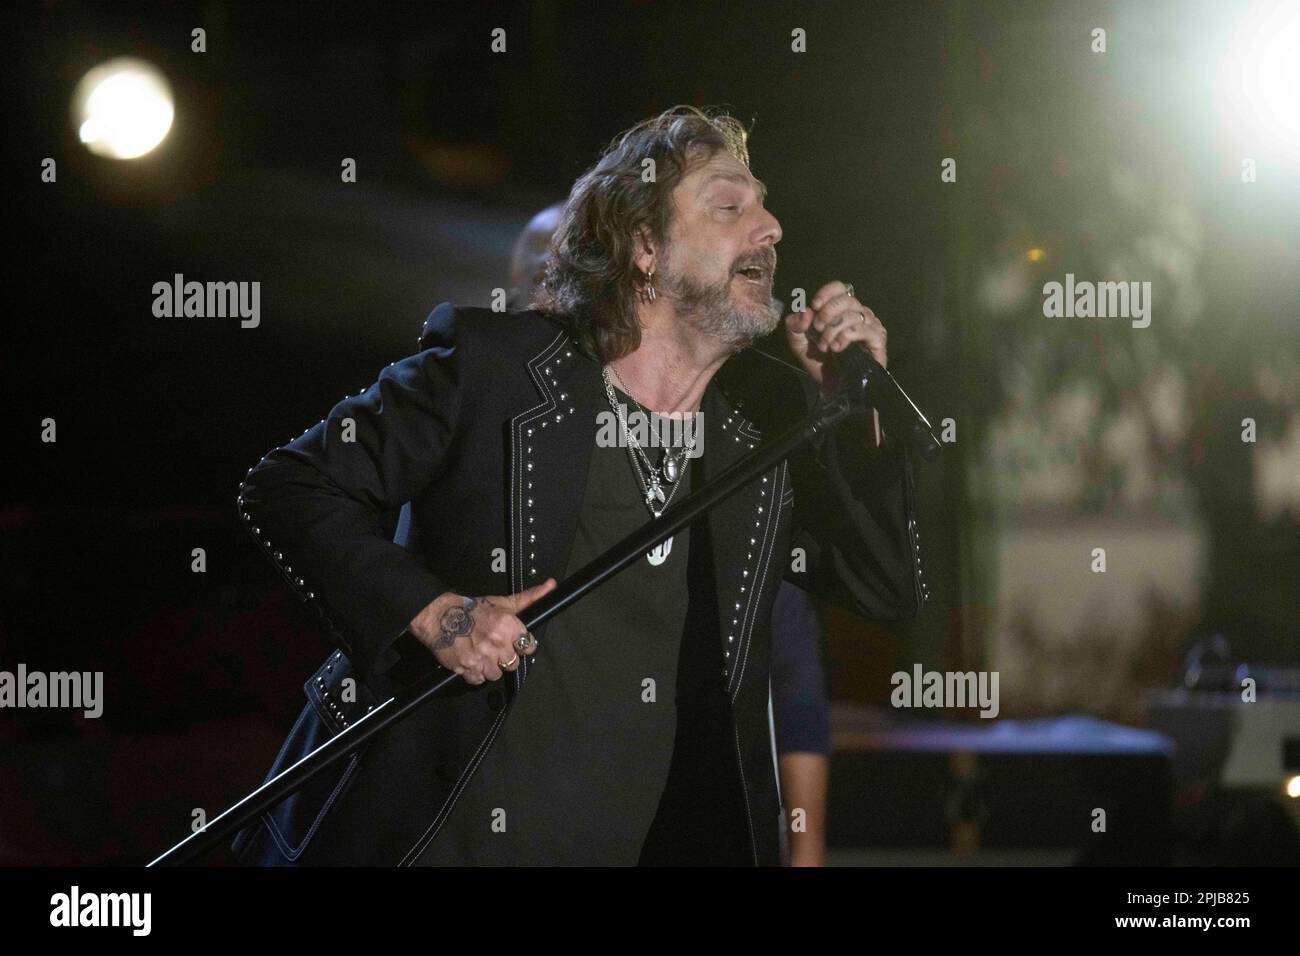 Austin Texas USA, March 31, 2023: Lead singer of rock & roll band The Black Crowes, CHRIS ROBINSON, performs onstage during a taping of Country Music Television's (CMT) Crossroads on an outdoor stage downtown. Credit: Bob Daemmrich/Alamy Live News Stock Photo